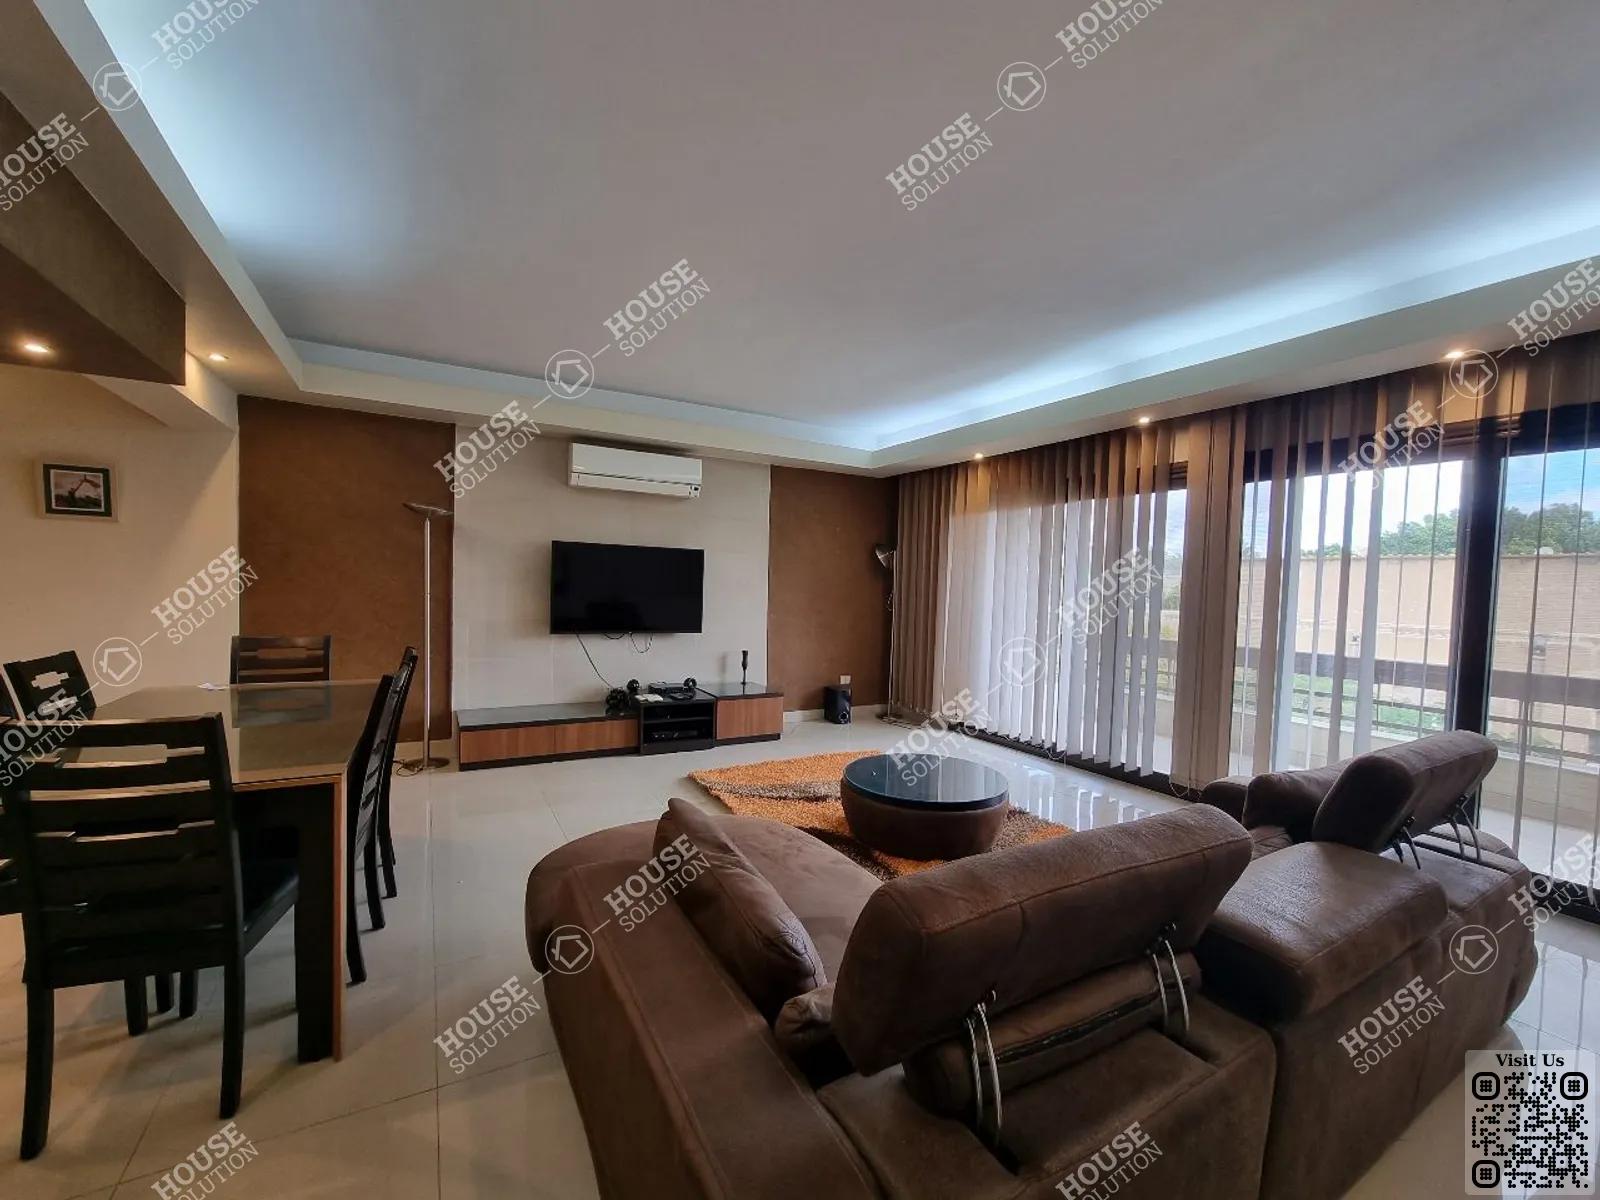 RECEPTION  @ Apartments For Rent In Maadi Maadi Sarayat Area: 160 m² consists of 2 Bedrooms 2 Bathrooms Modern furnished 5 stars #3550-0